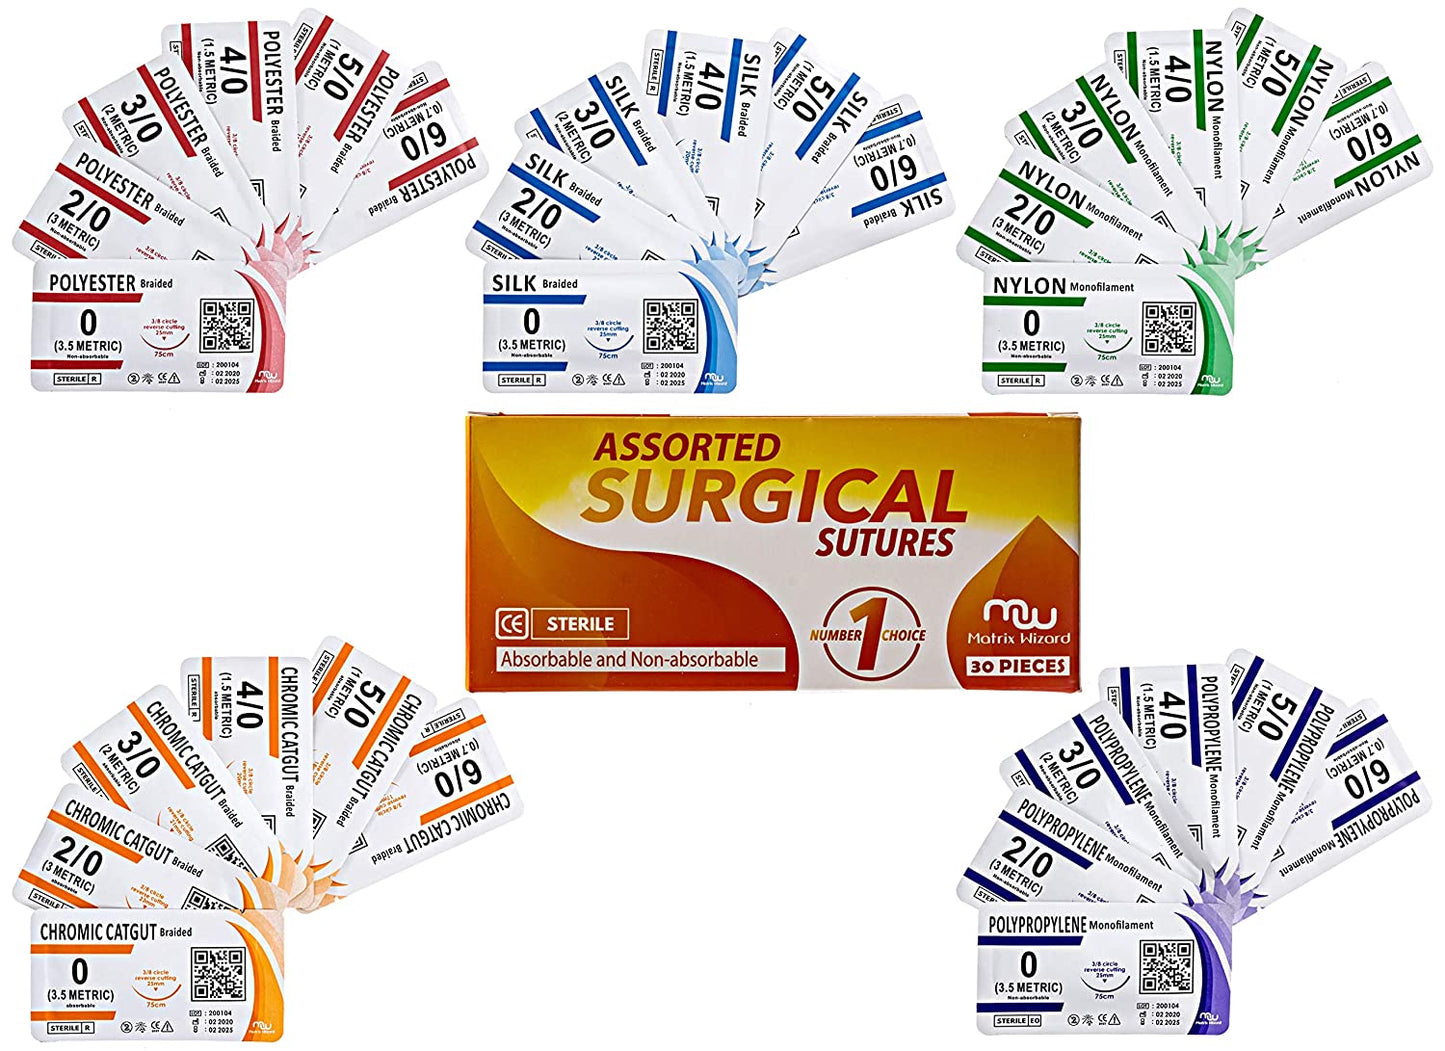 Sutures Thread with Needle (30PK Mix Absorbable: Chromic; Non-Absorbable: Silk, Nylon, Polyester, Polypropylene: 0,2-0,3-0,4-0,5-0,6-0) - Surgical Stitch Kit; Medical, Vet, RN's Hospital Training